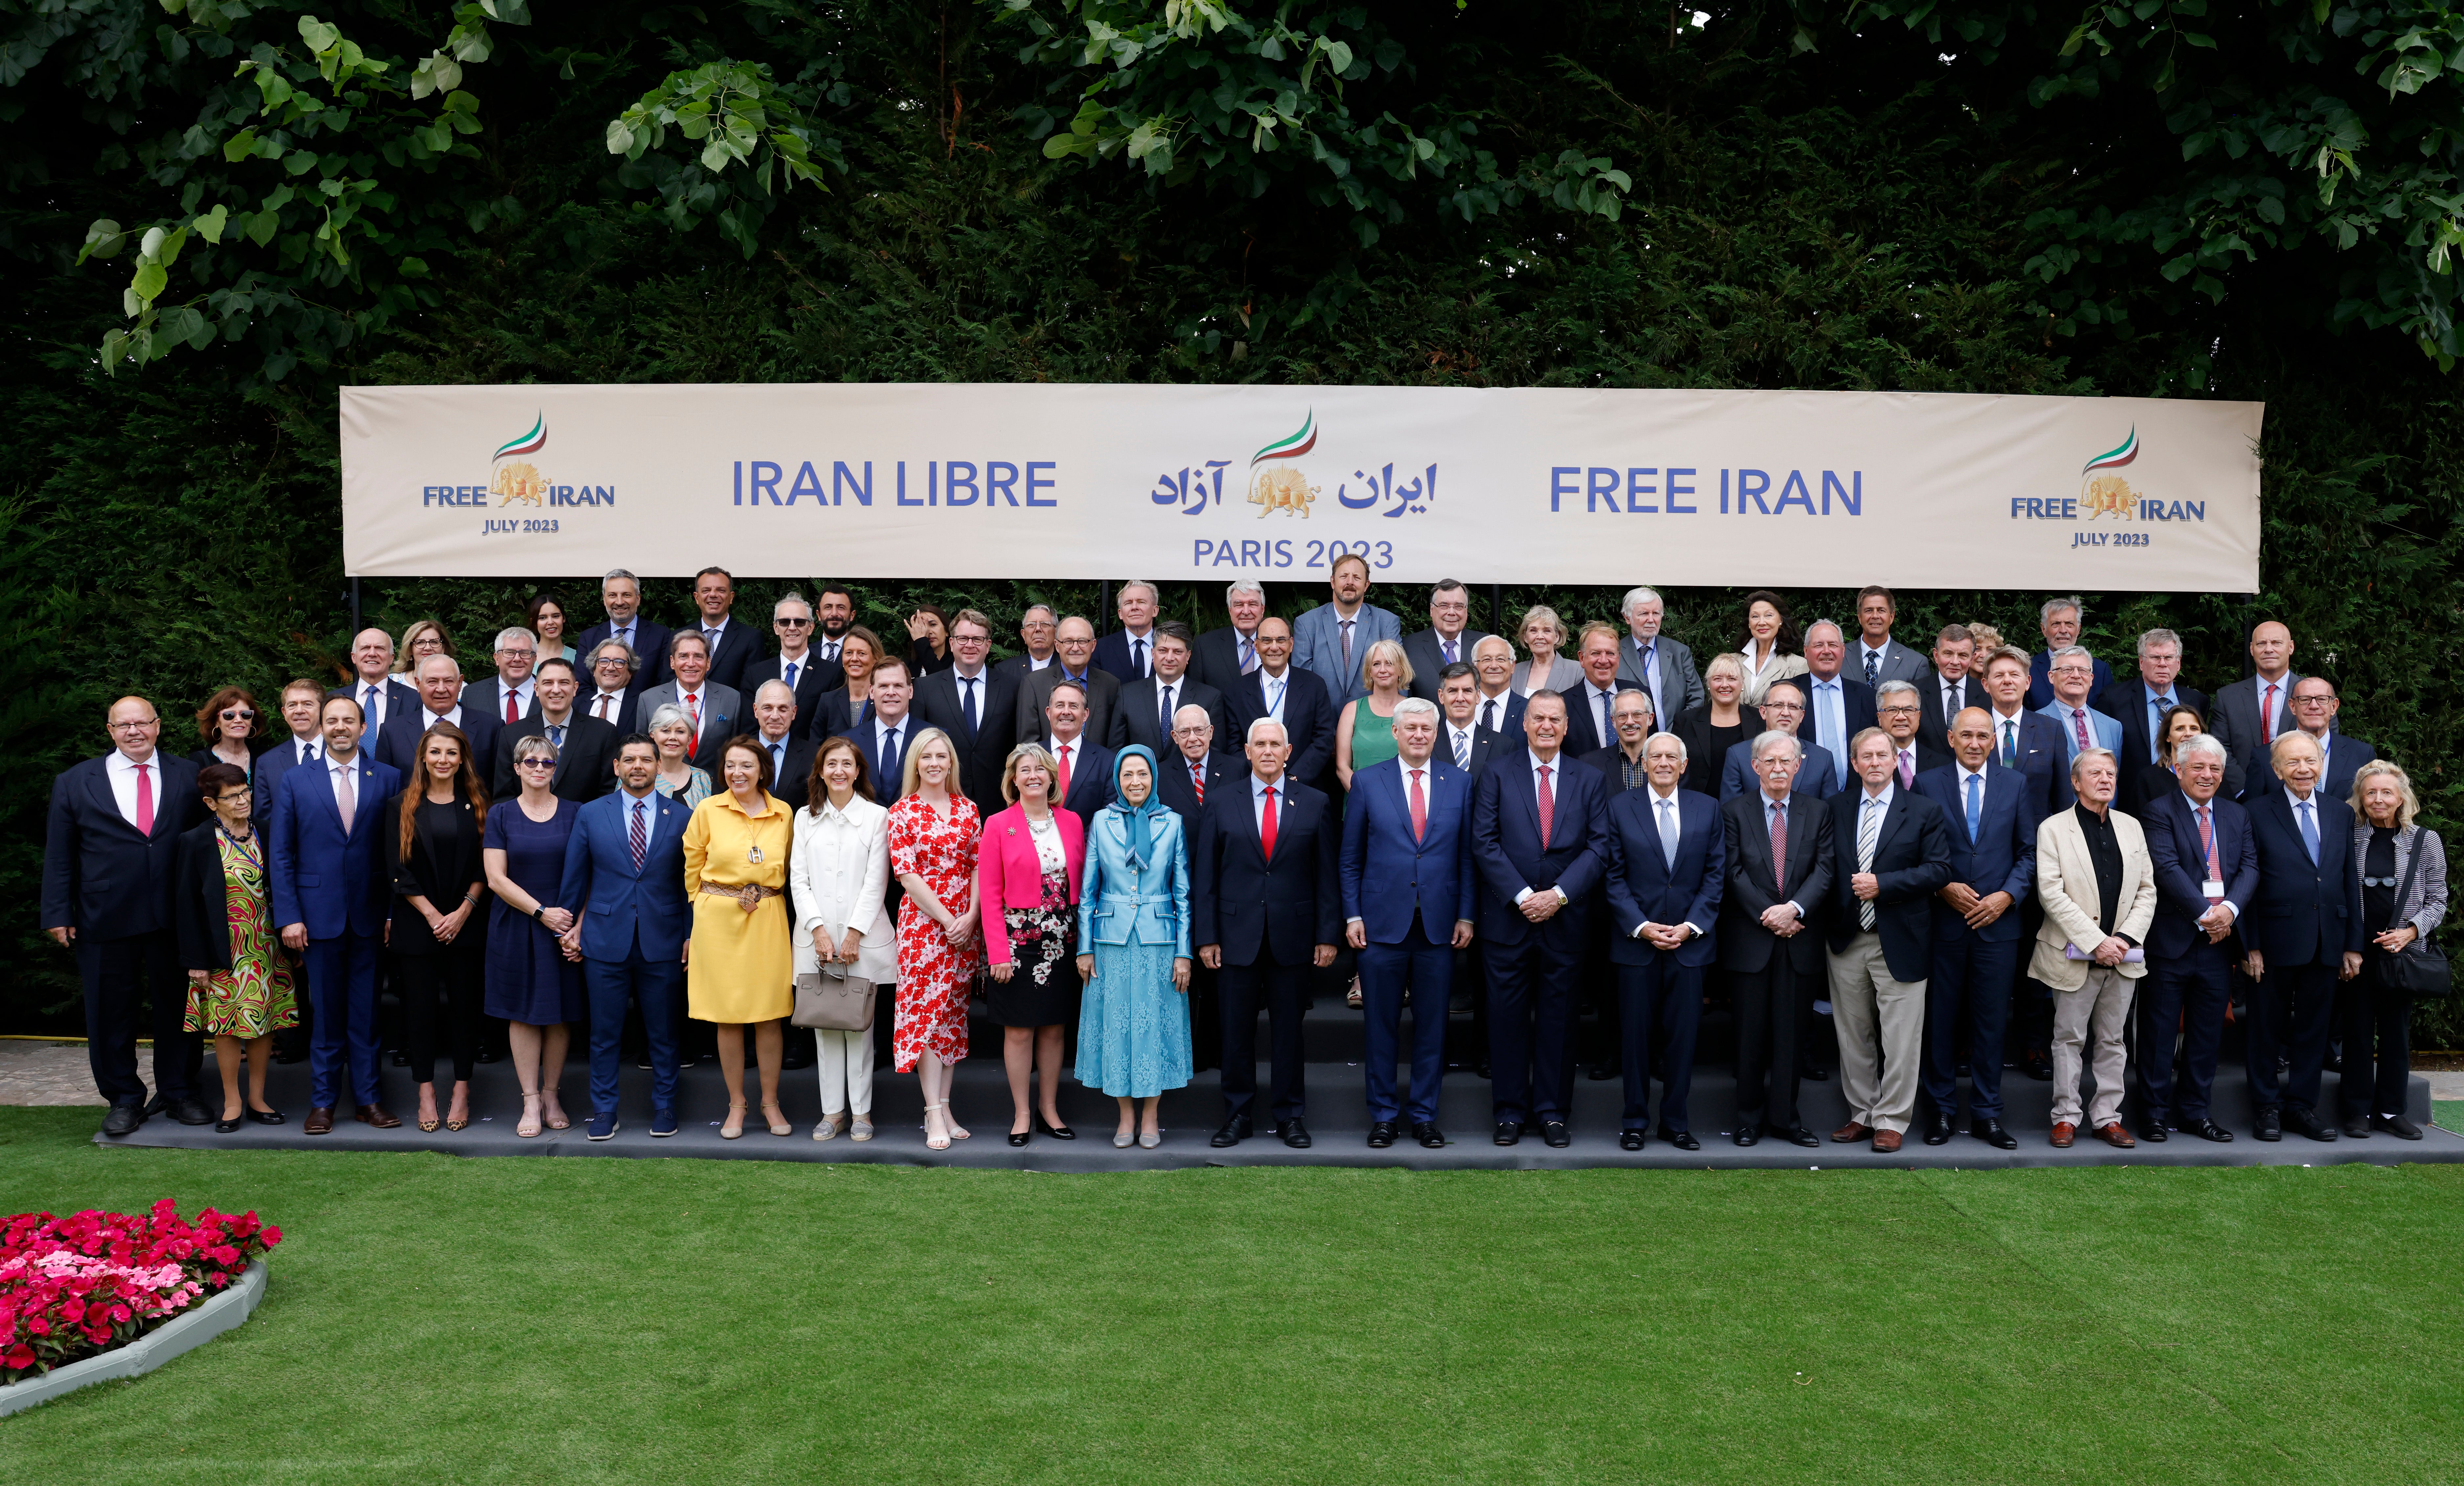 VIPs including Mike Pence, John Bolton and others take a group photograph at the 2023 Free Iran rally hosted by the NCRI